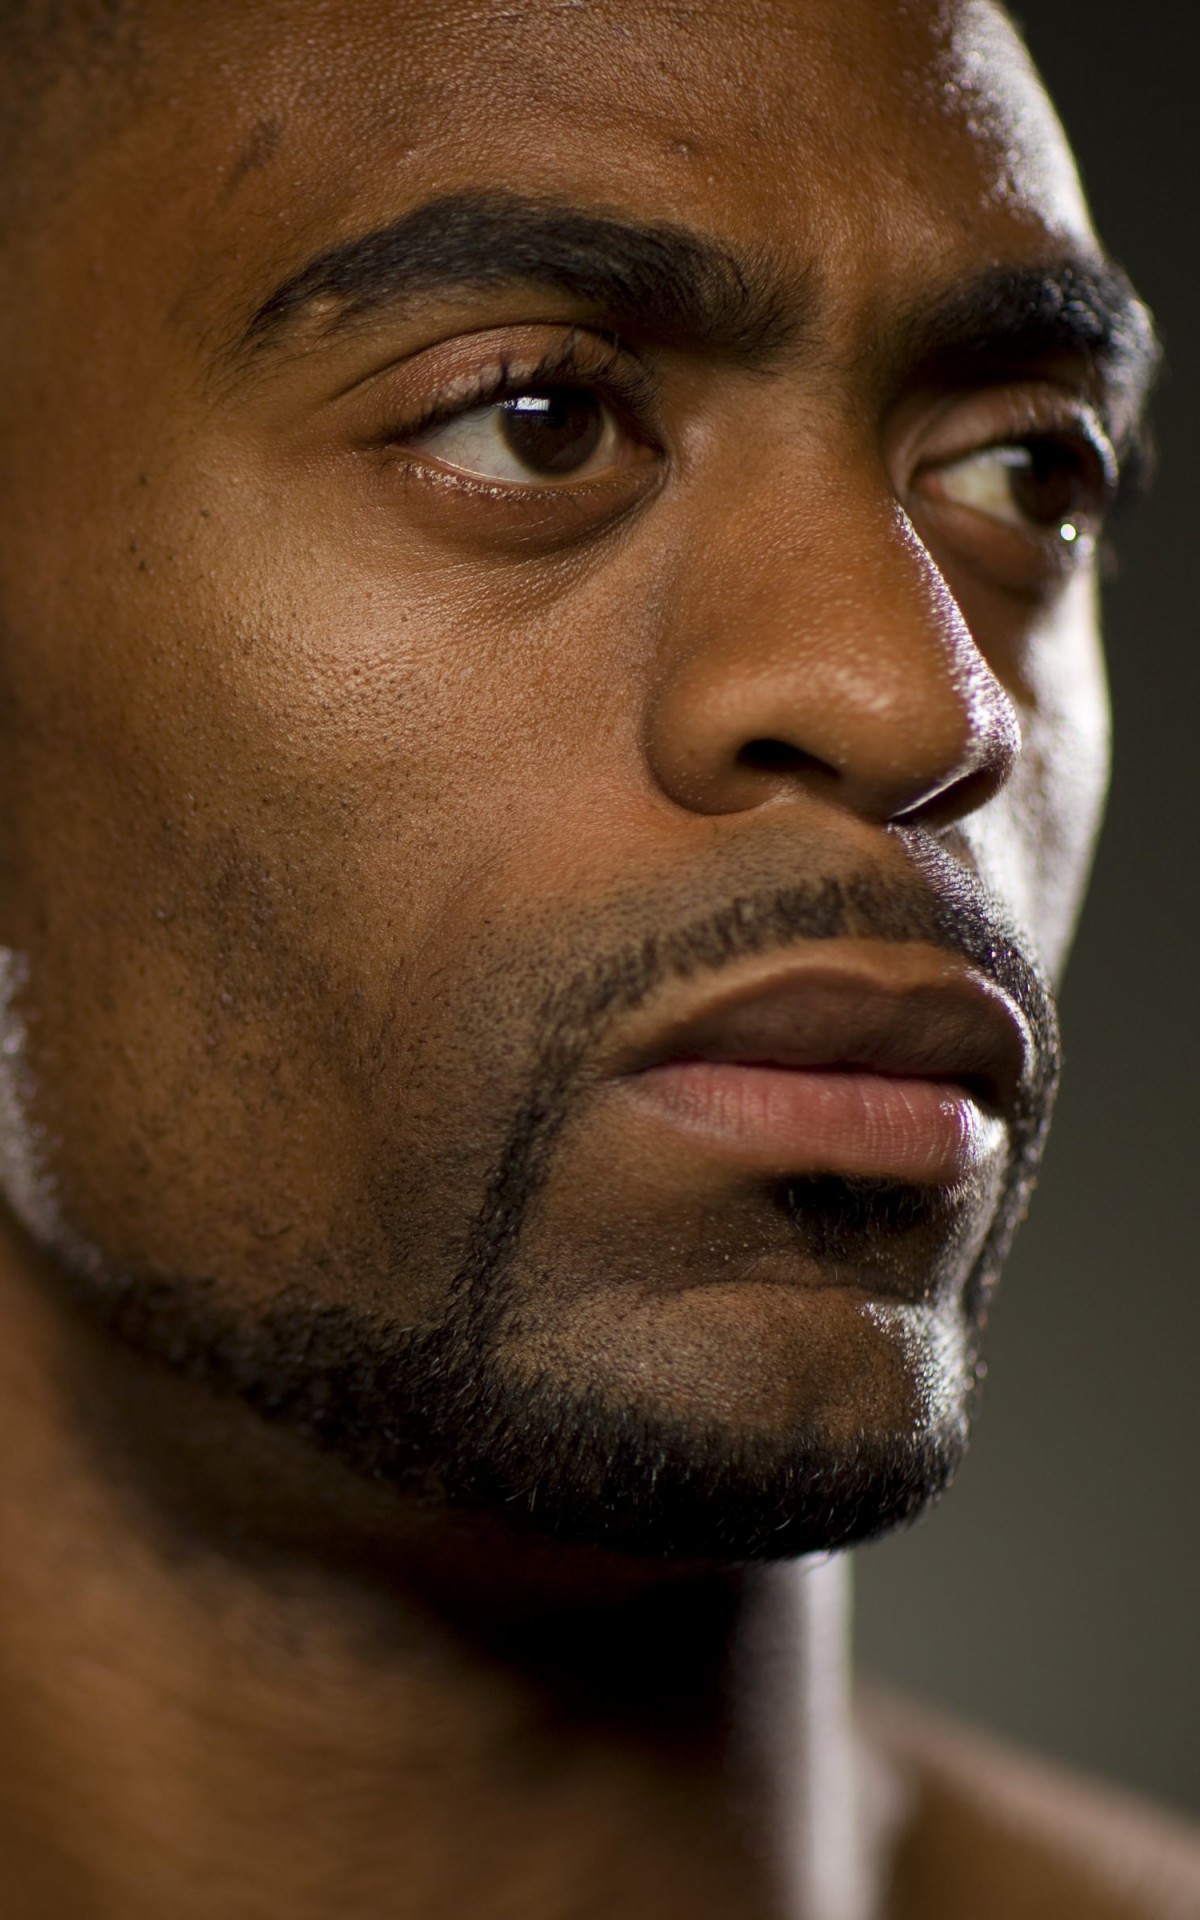 Tyson Gay Wallpaper for Amazon Kindle Fire HDX